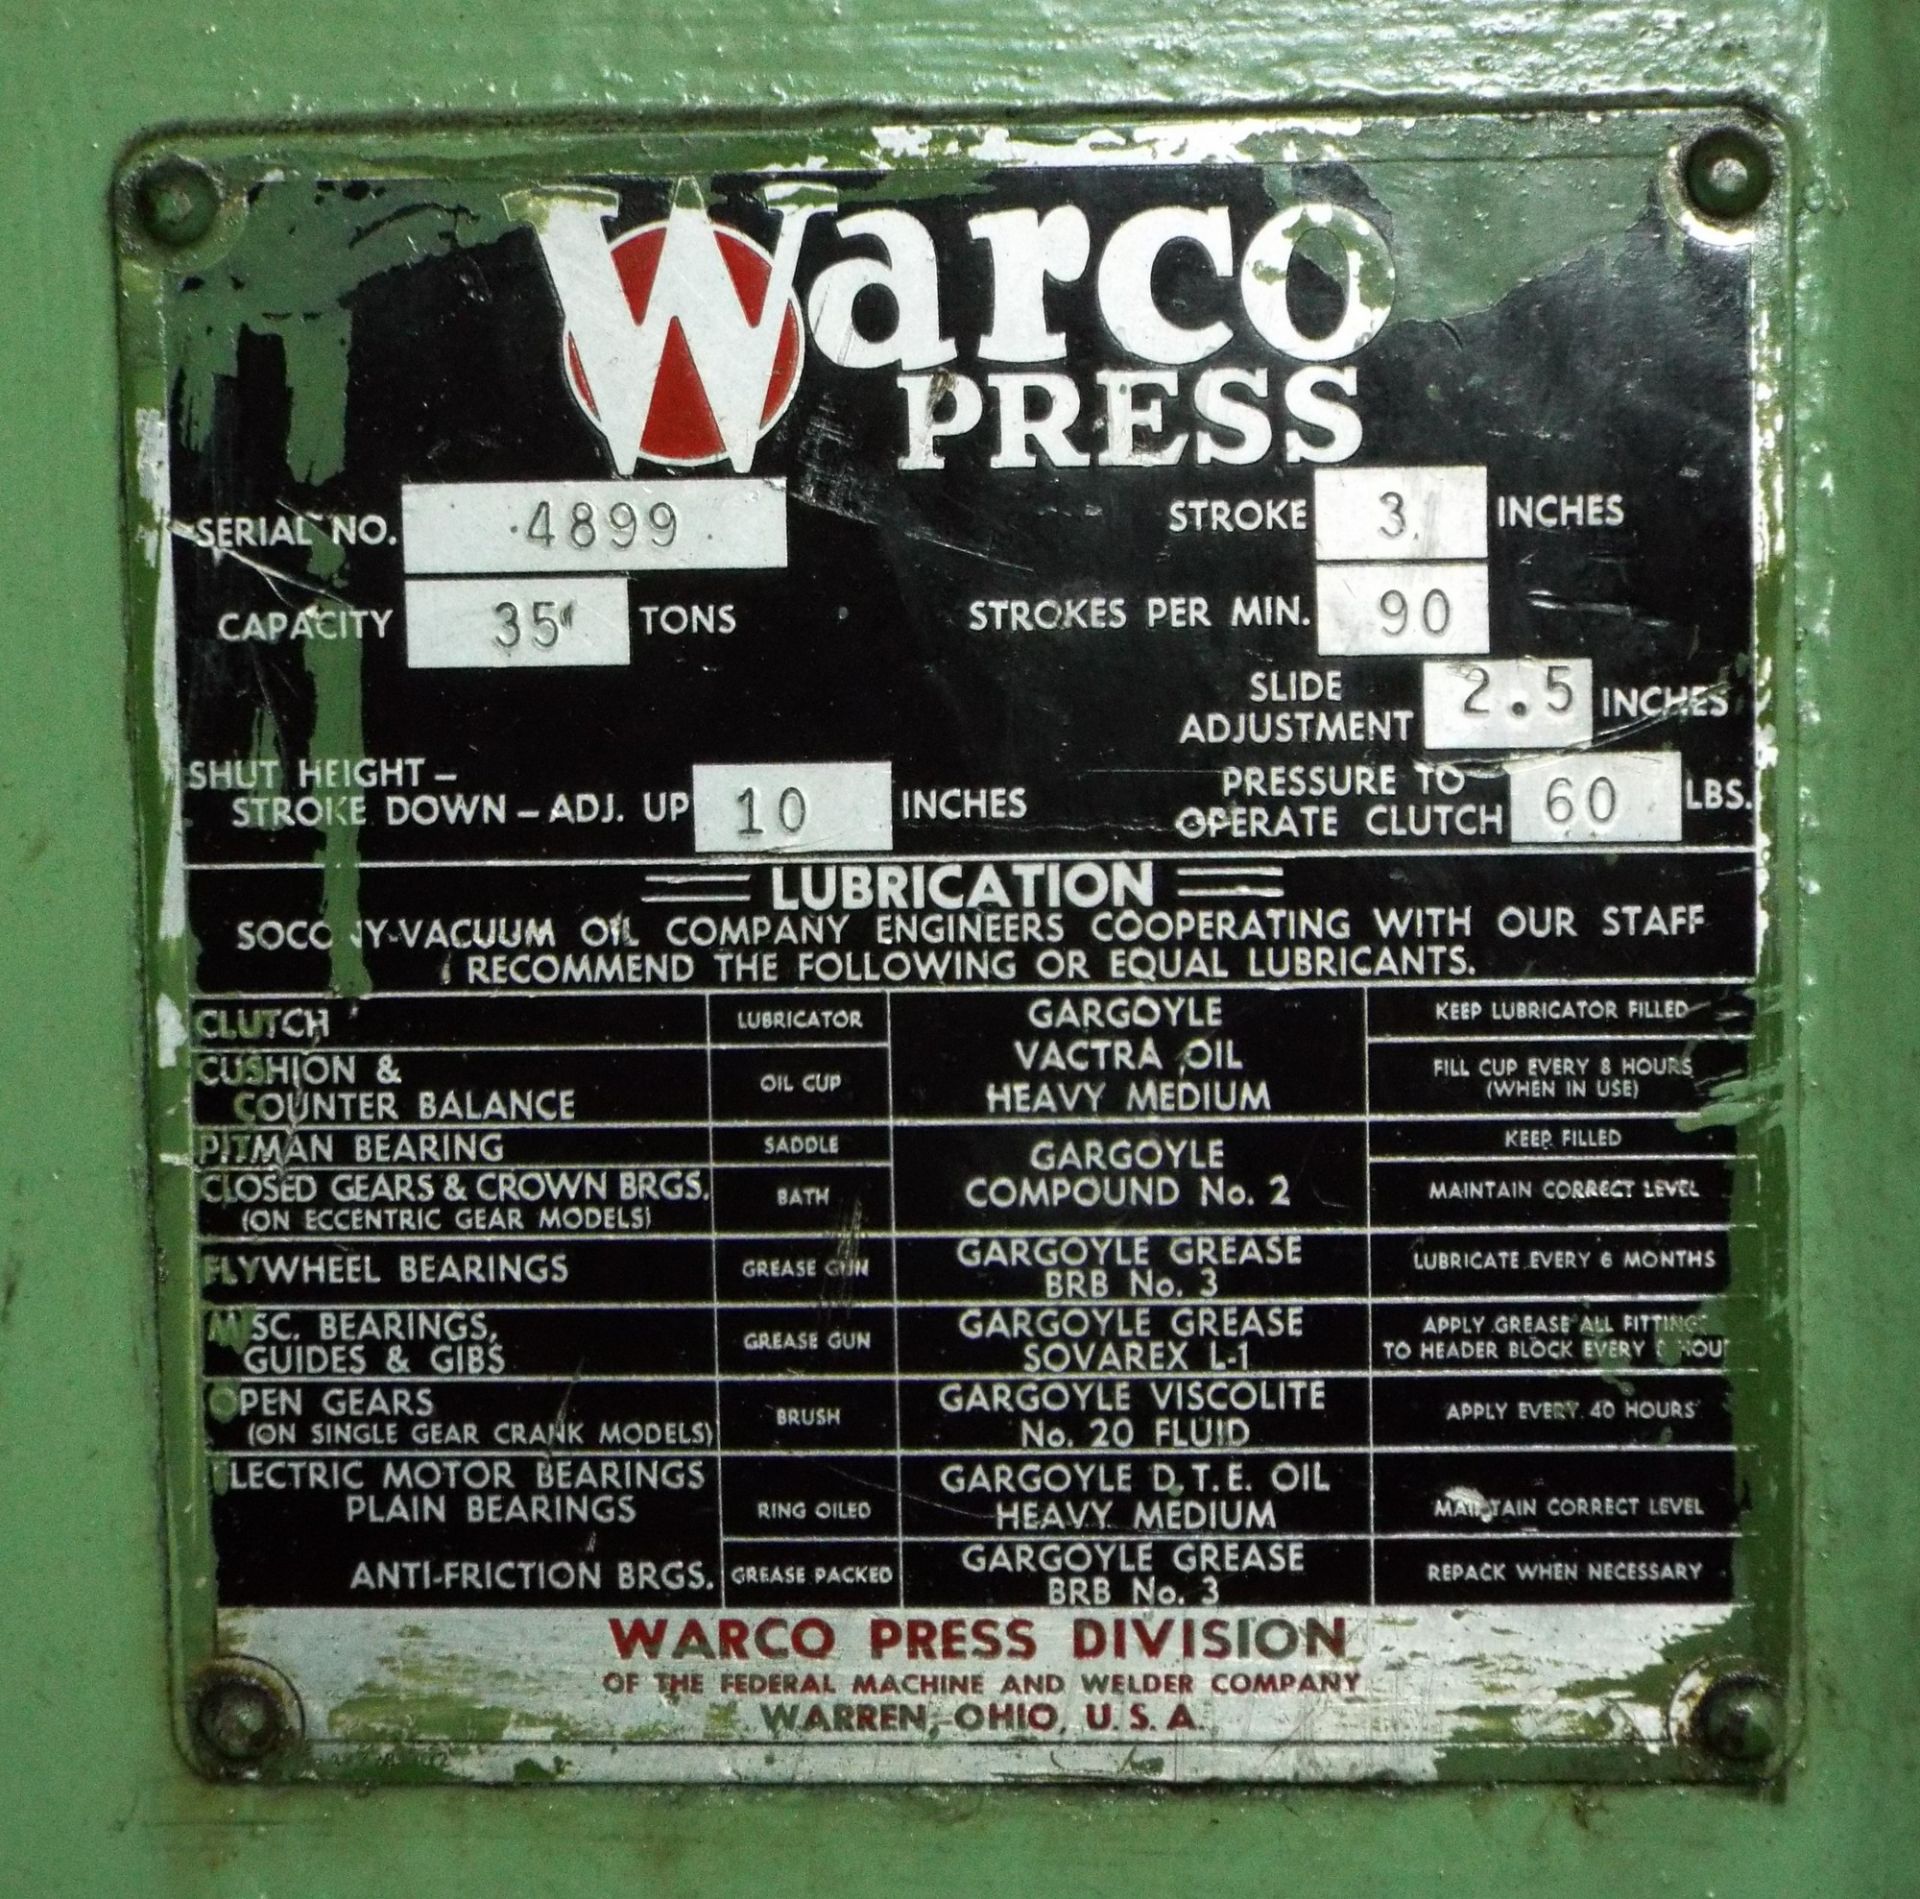 WARCO OBI PUNCH PRESS WITH 35 TON CAPACITY, 3" STROKE, 2.5" RAM ADJUSTMENT, 90 SPM, 14" X 20" - Image 3 of 3